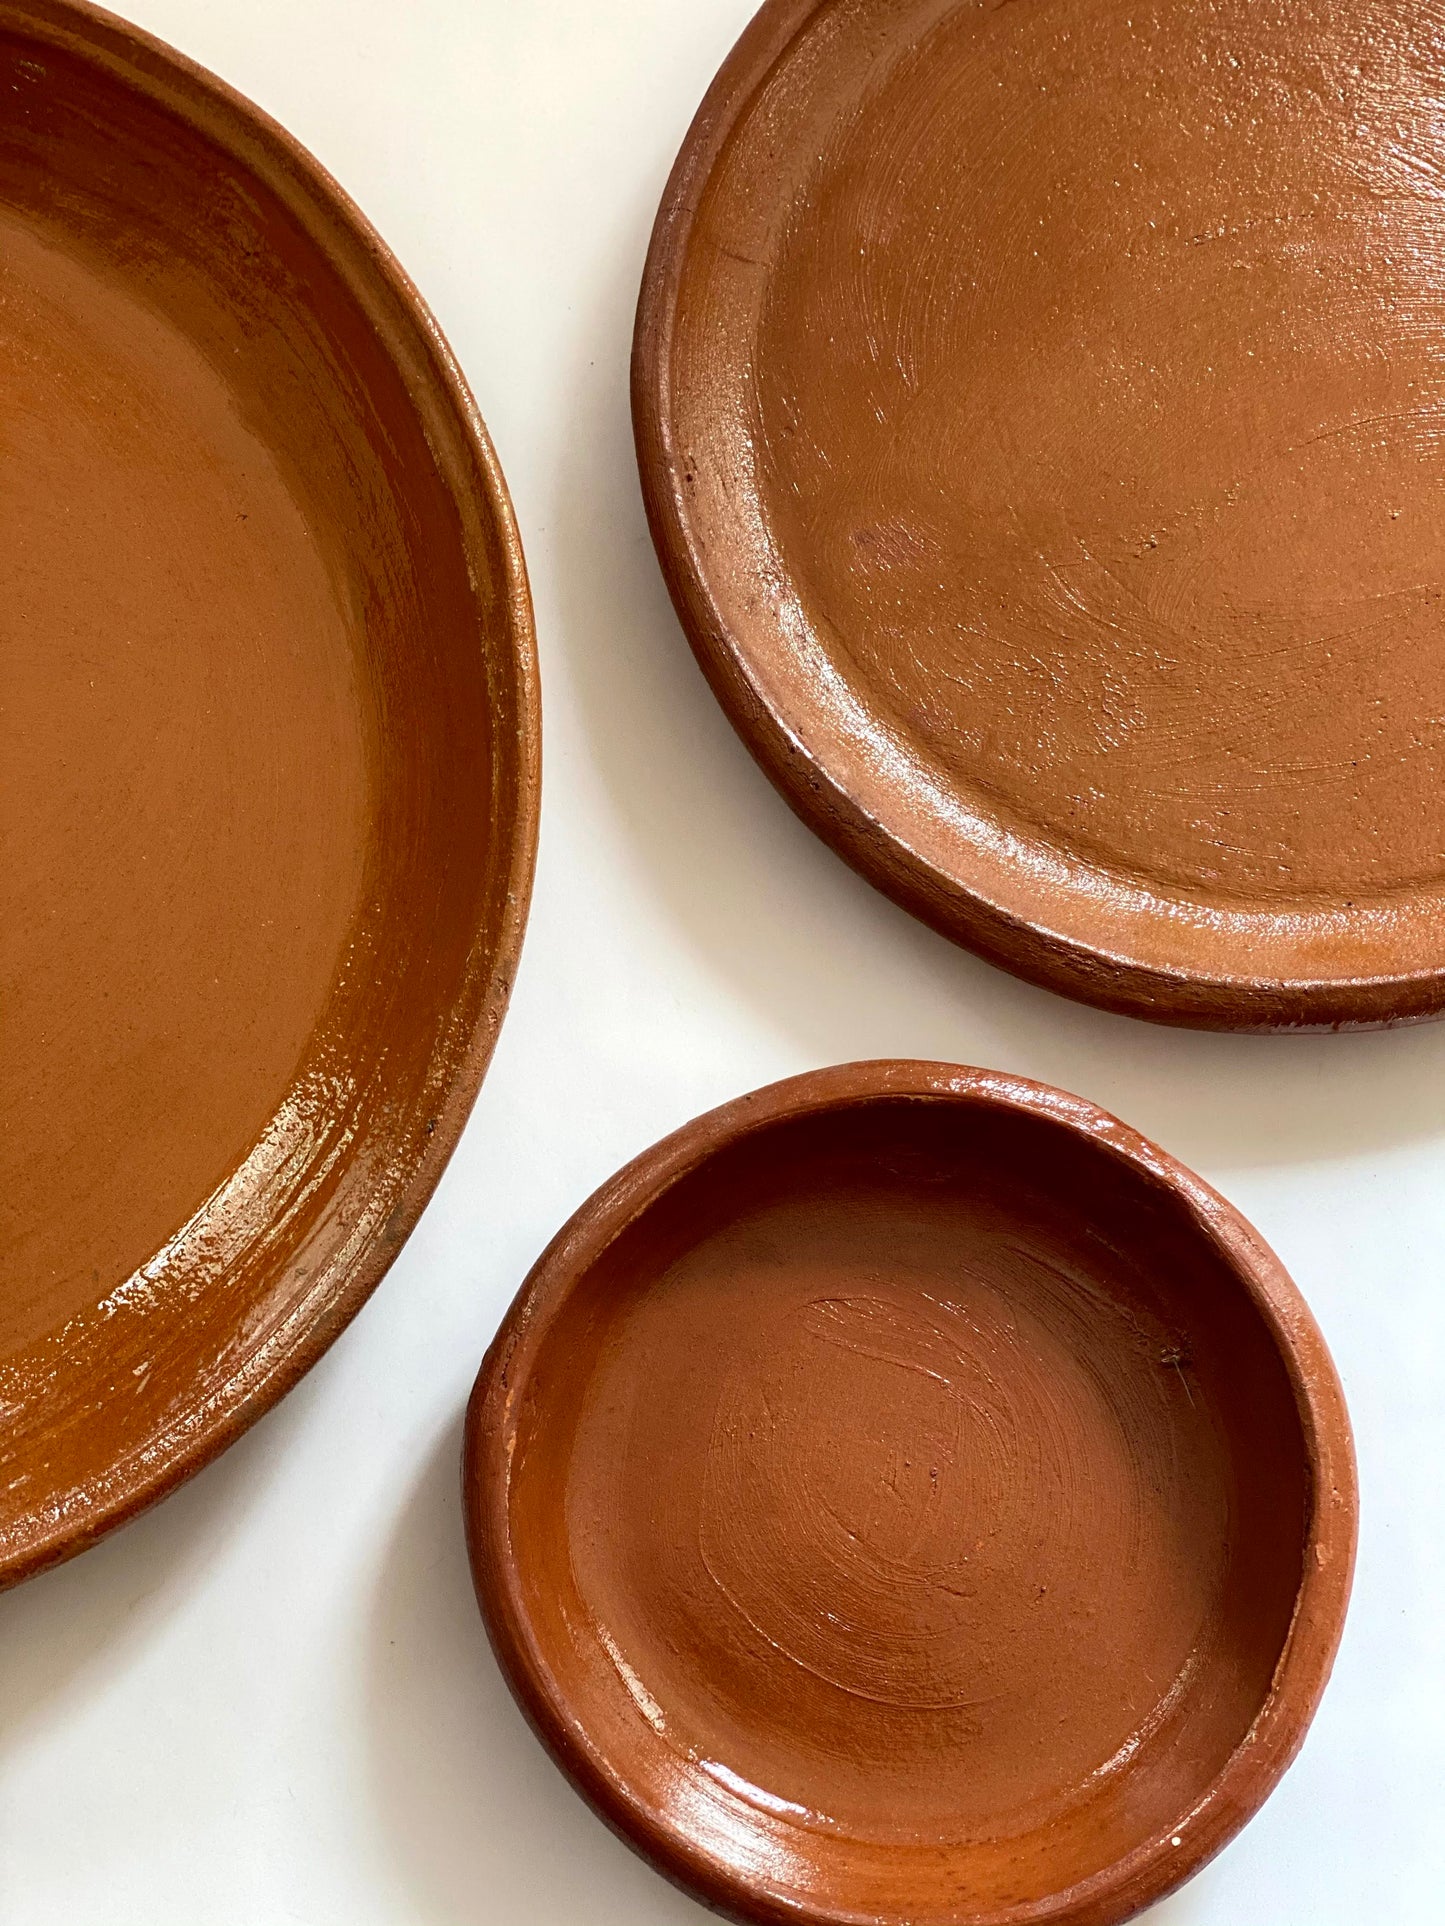 Small Red Clay Plate